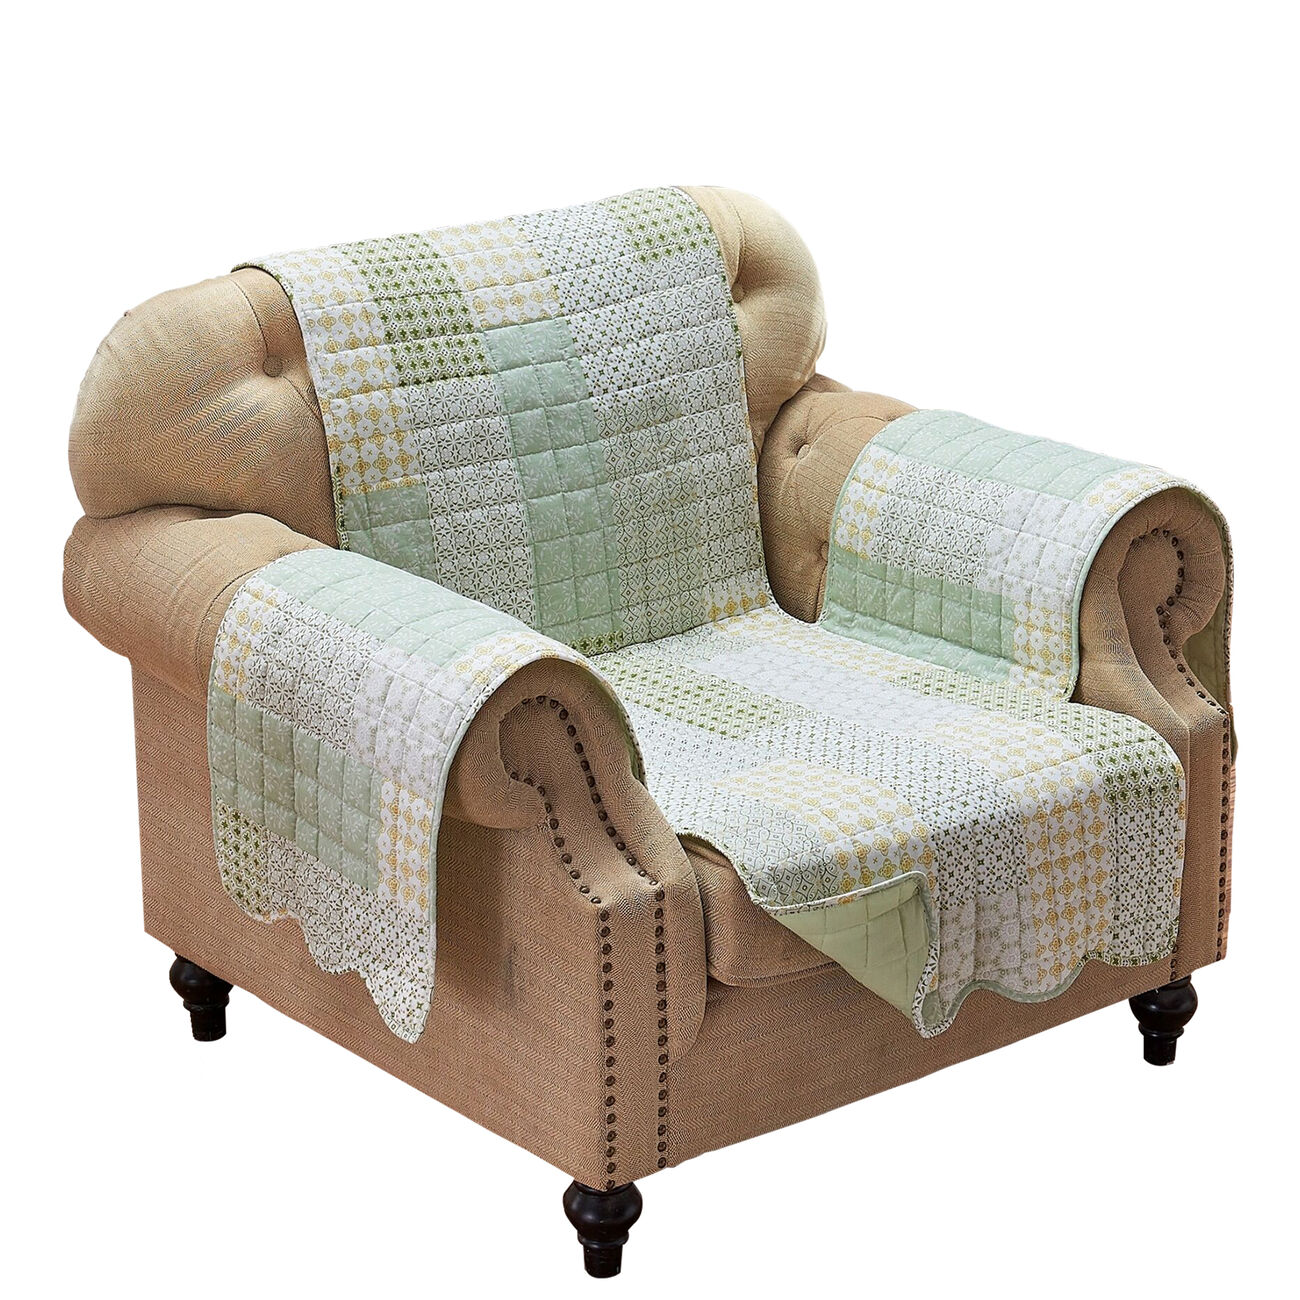 Fabric Armchair Protector with Geometric Pattern Motifs, Green